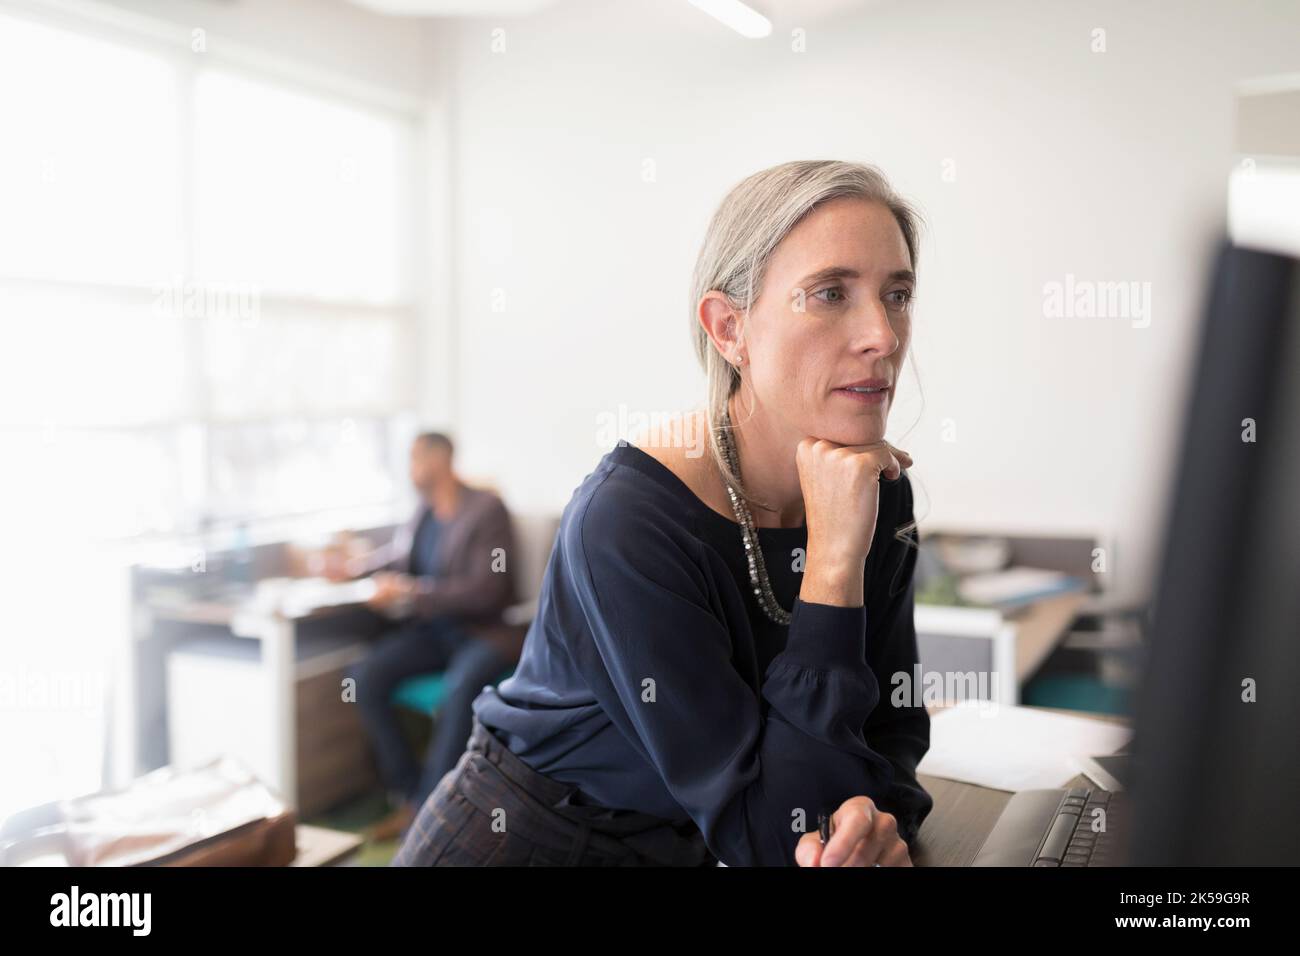 Female manager with hand on chin looking at computer Stock Photo